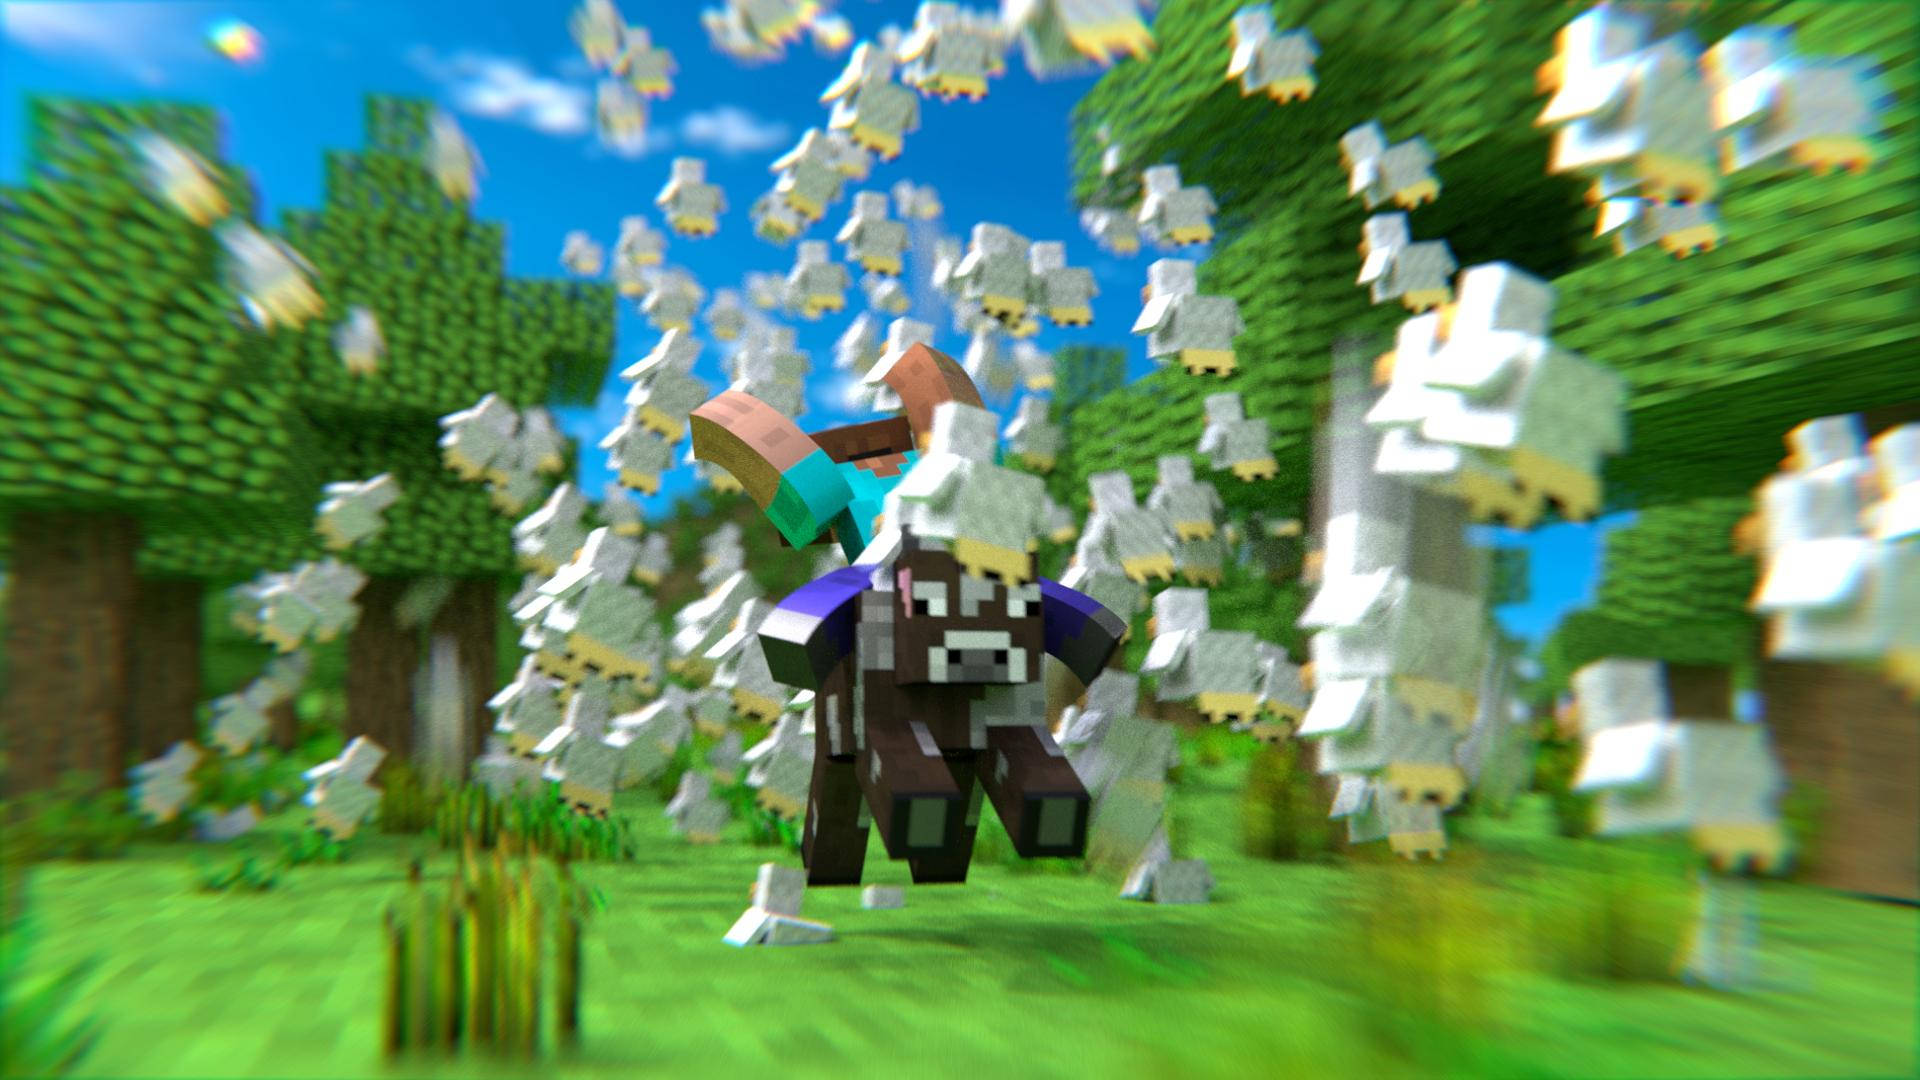 Moving Minecraft Steve With A Horse Background